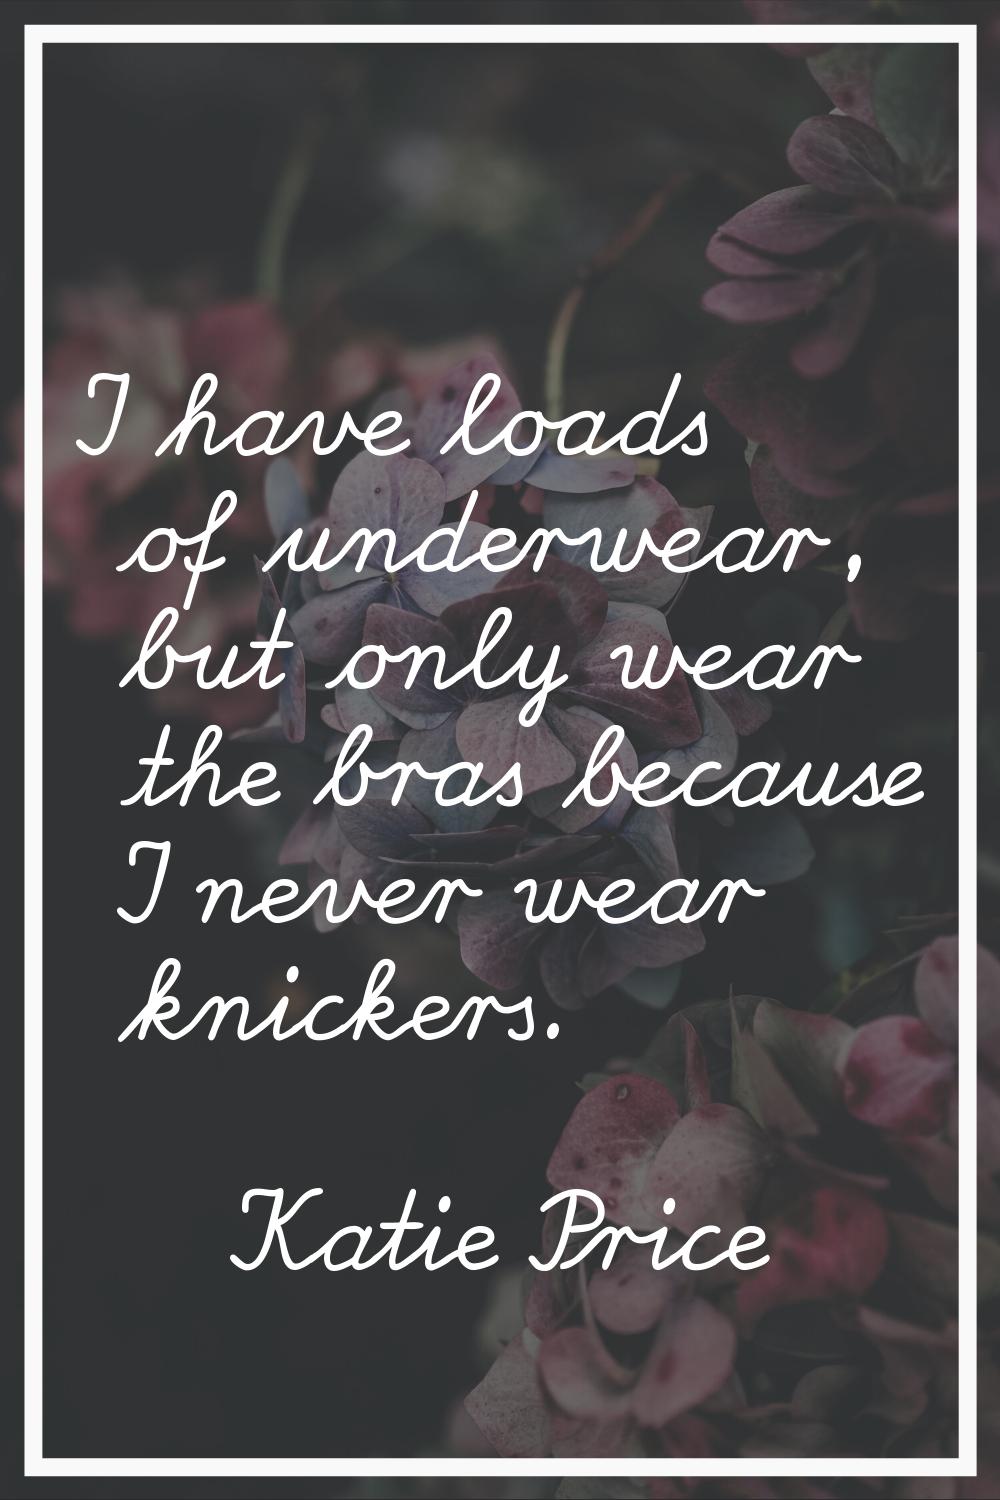 I have loads of underwear, but only wear the bras because I never wear knickers.